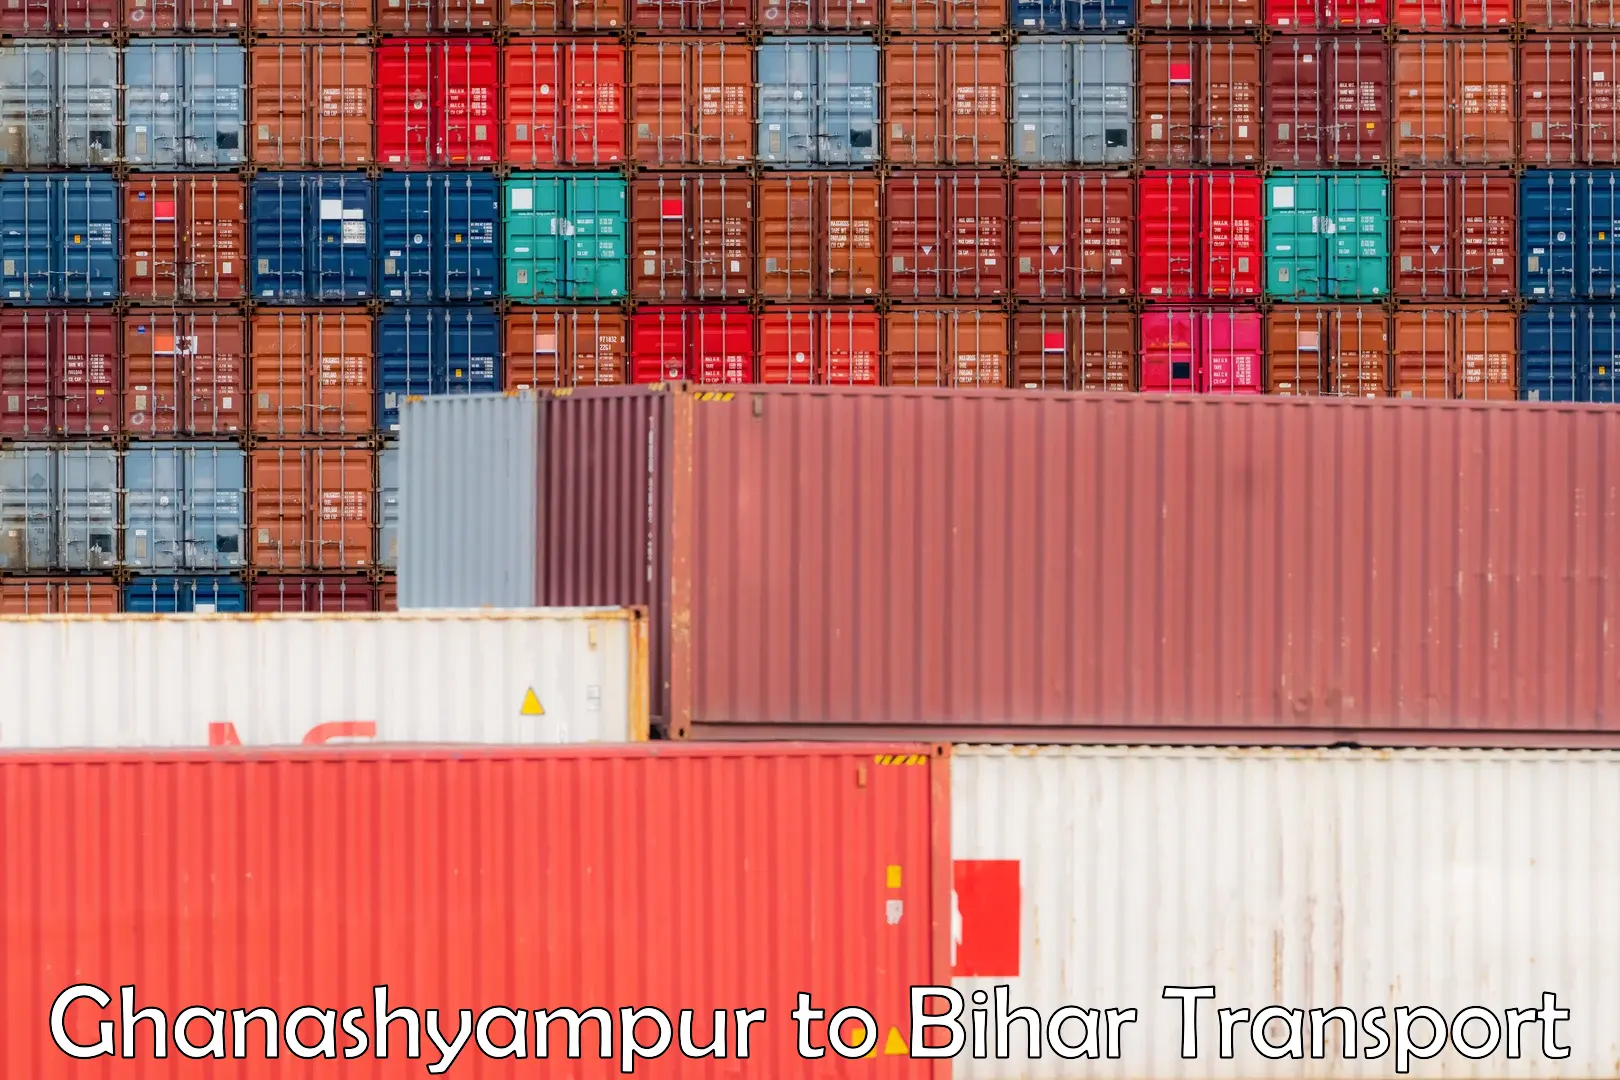 Container transport service Ghanashyampur to Bankipore